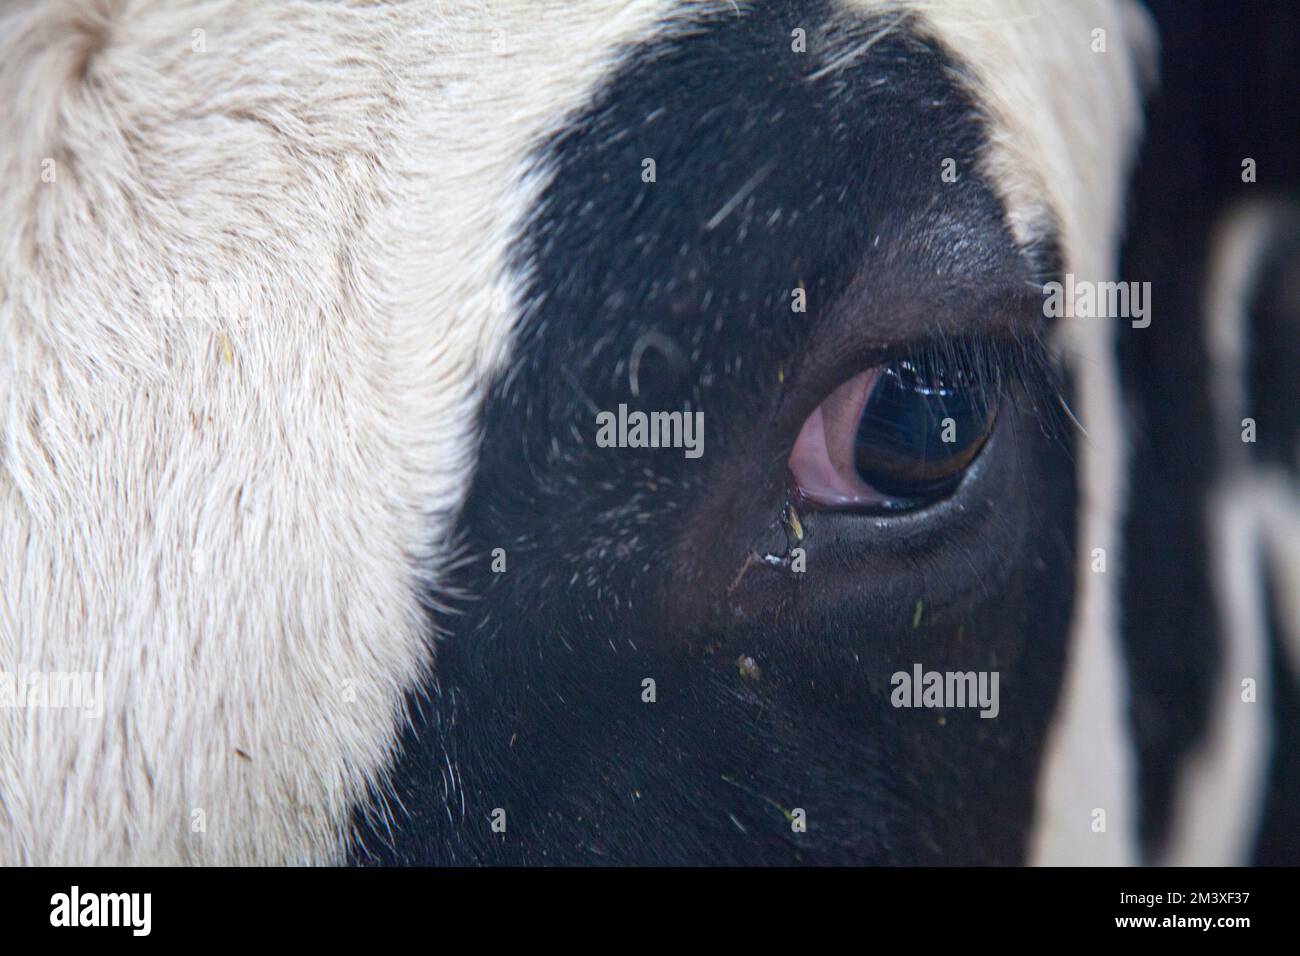 close up view of a cow Stock Photo